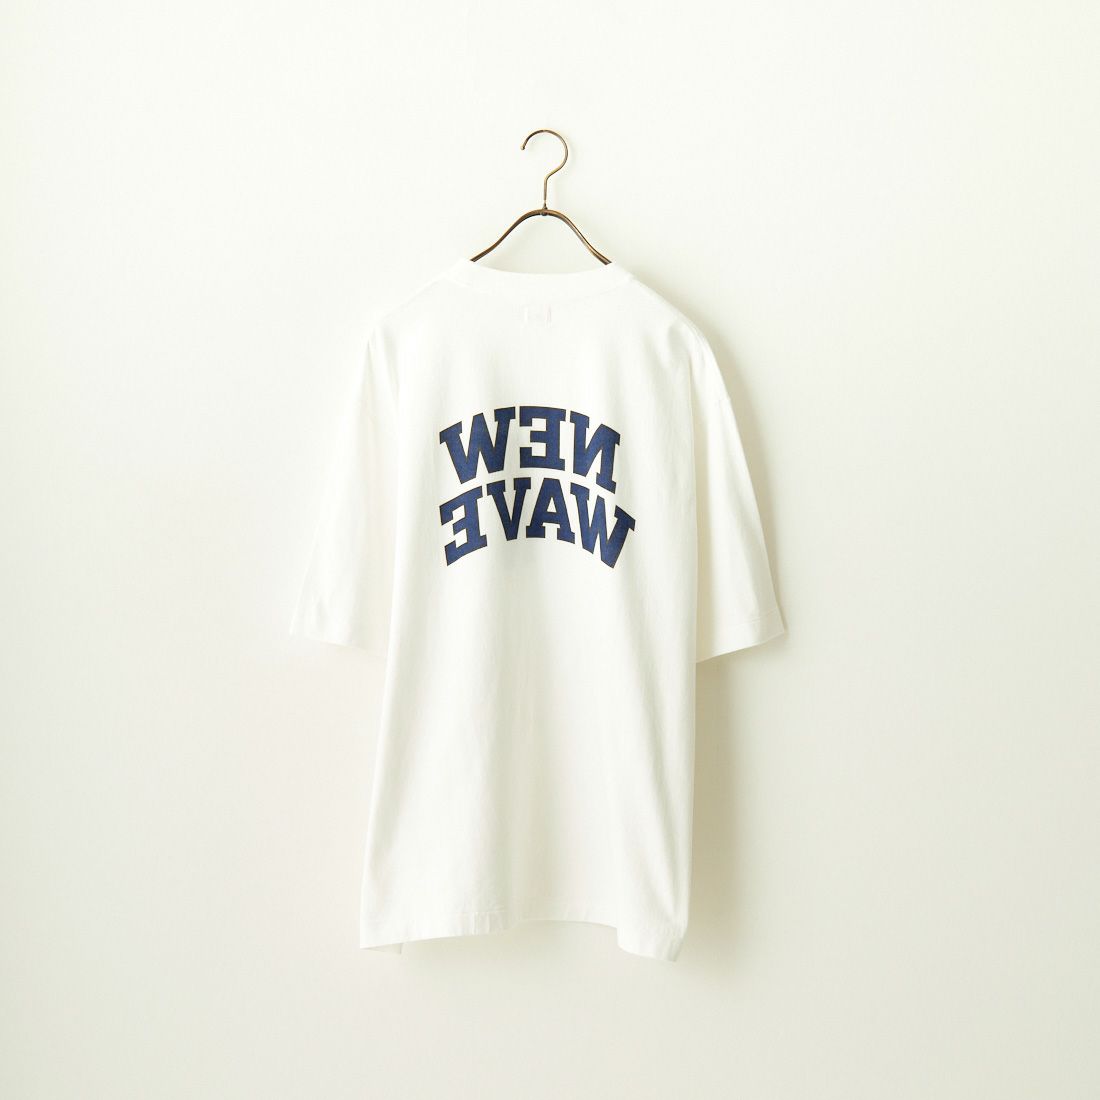 blurhms ROOTSTOCK [ブラームス ルーツストック] 別注 NEW WAVE プリントTシャツ [BROOTS24S33-JF] WHITE